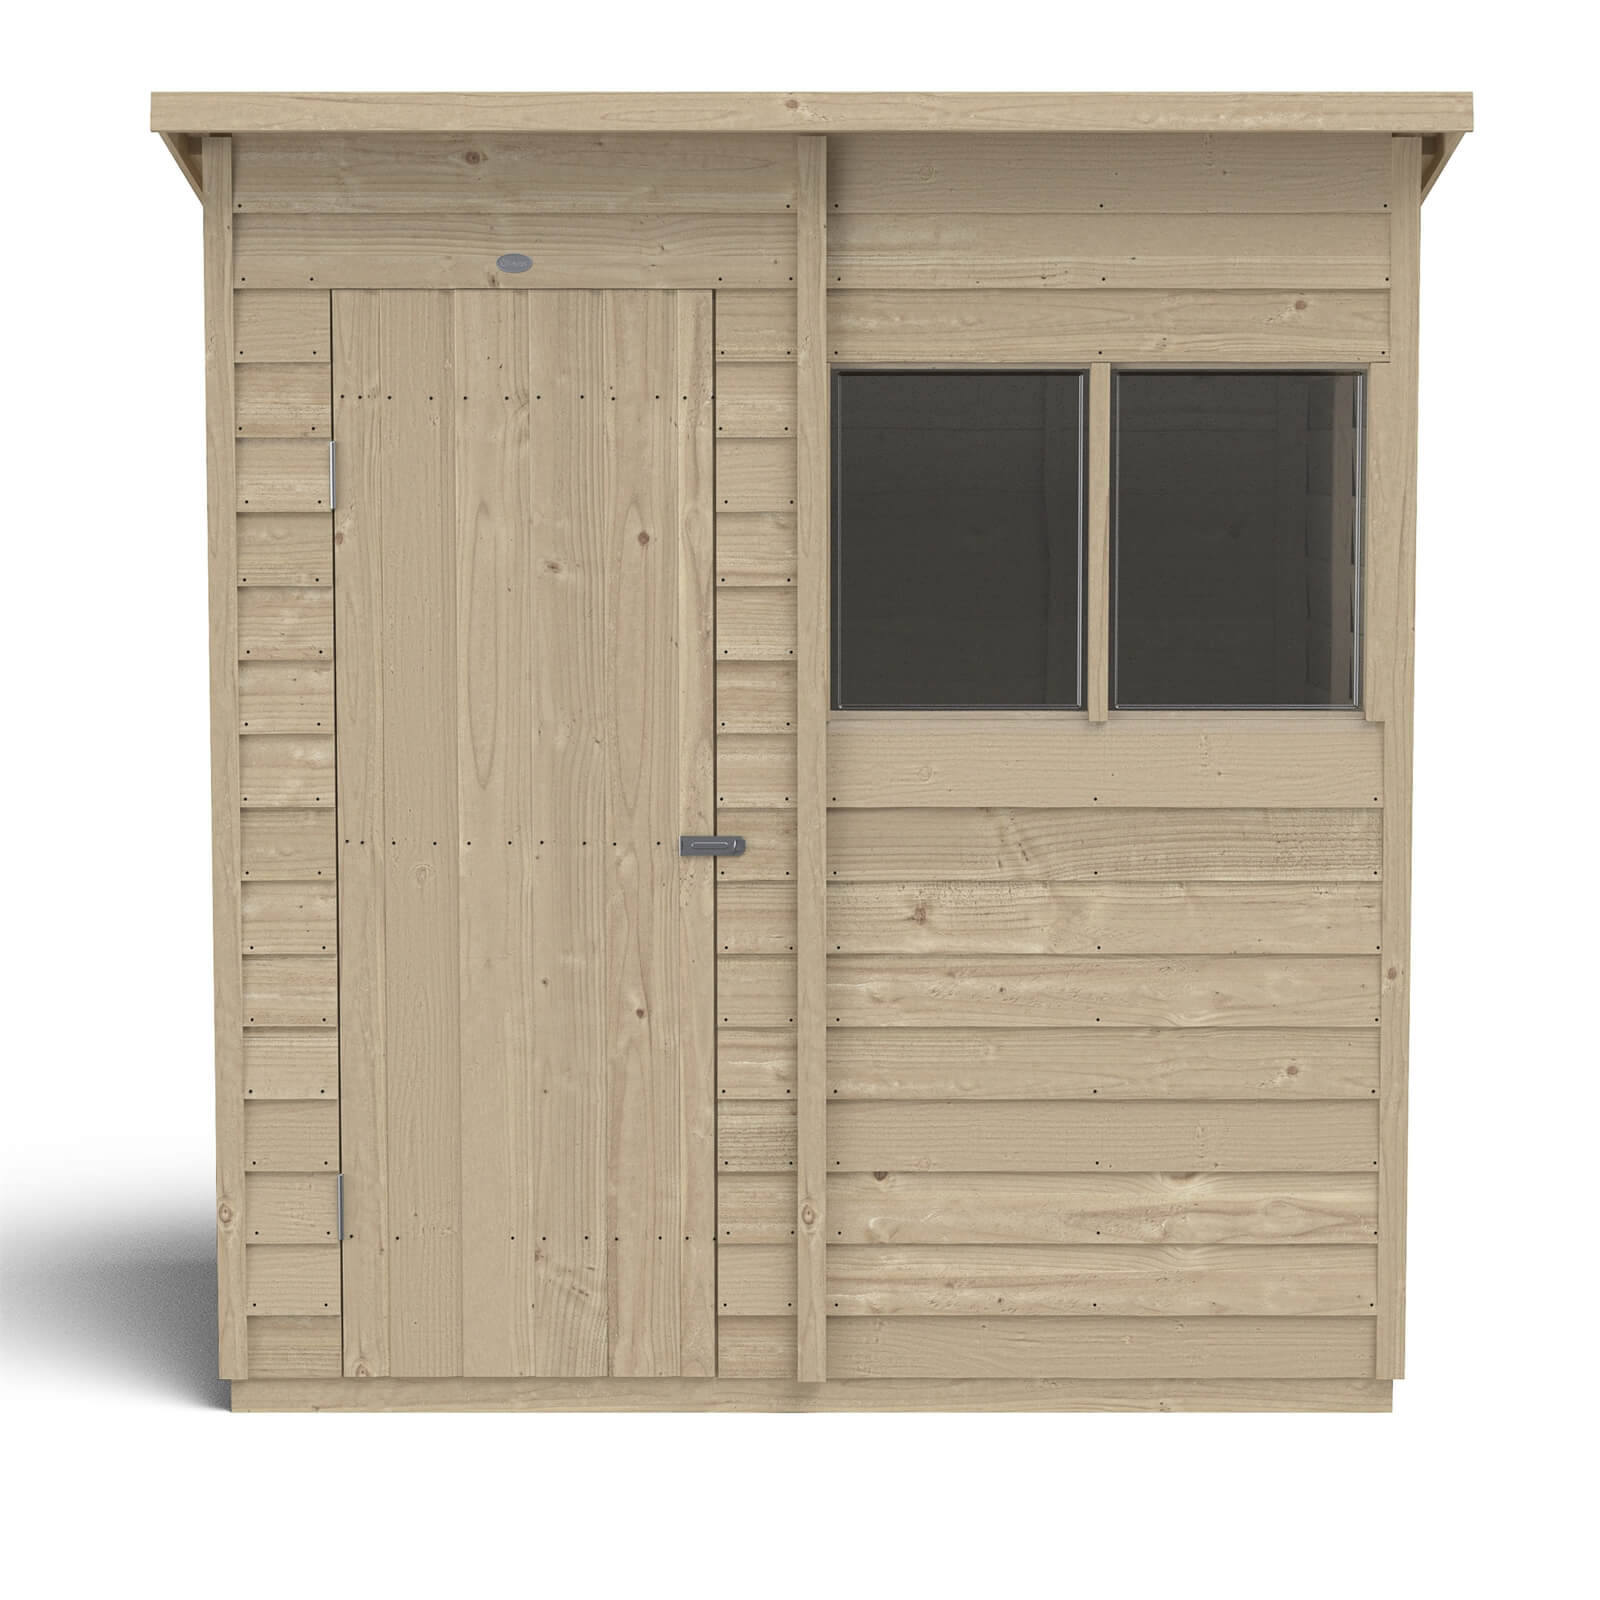 Forest 6 x 4ft Overlap Pressure Treated Pent Shed -incl. Installation